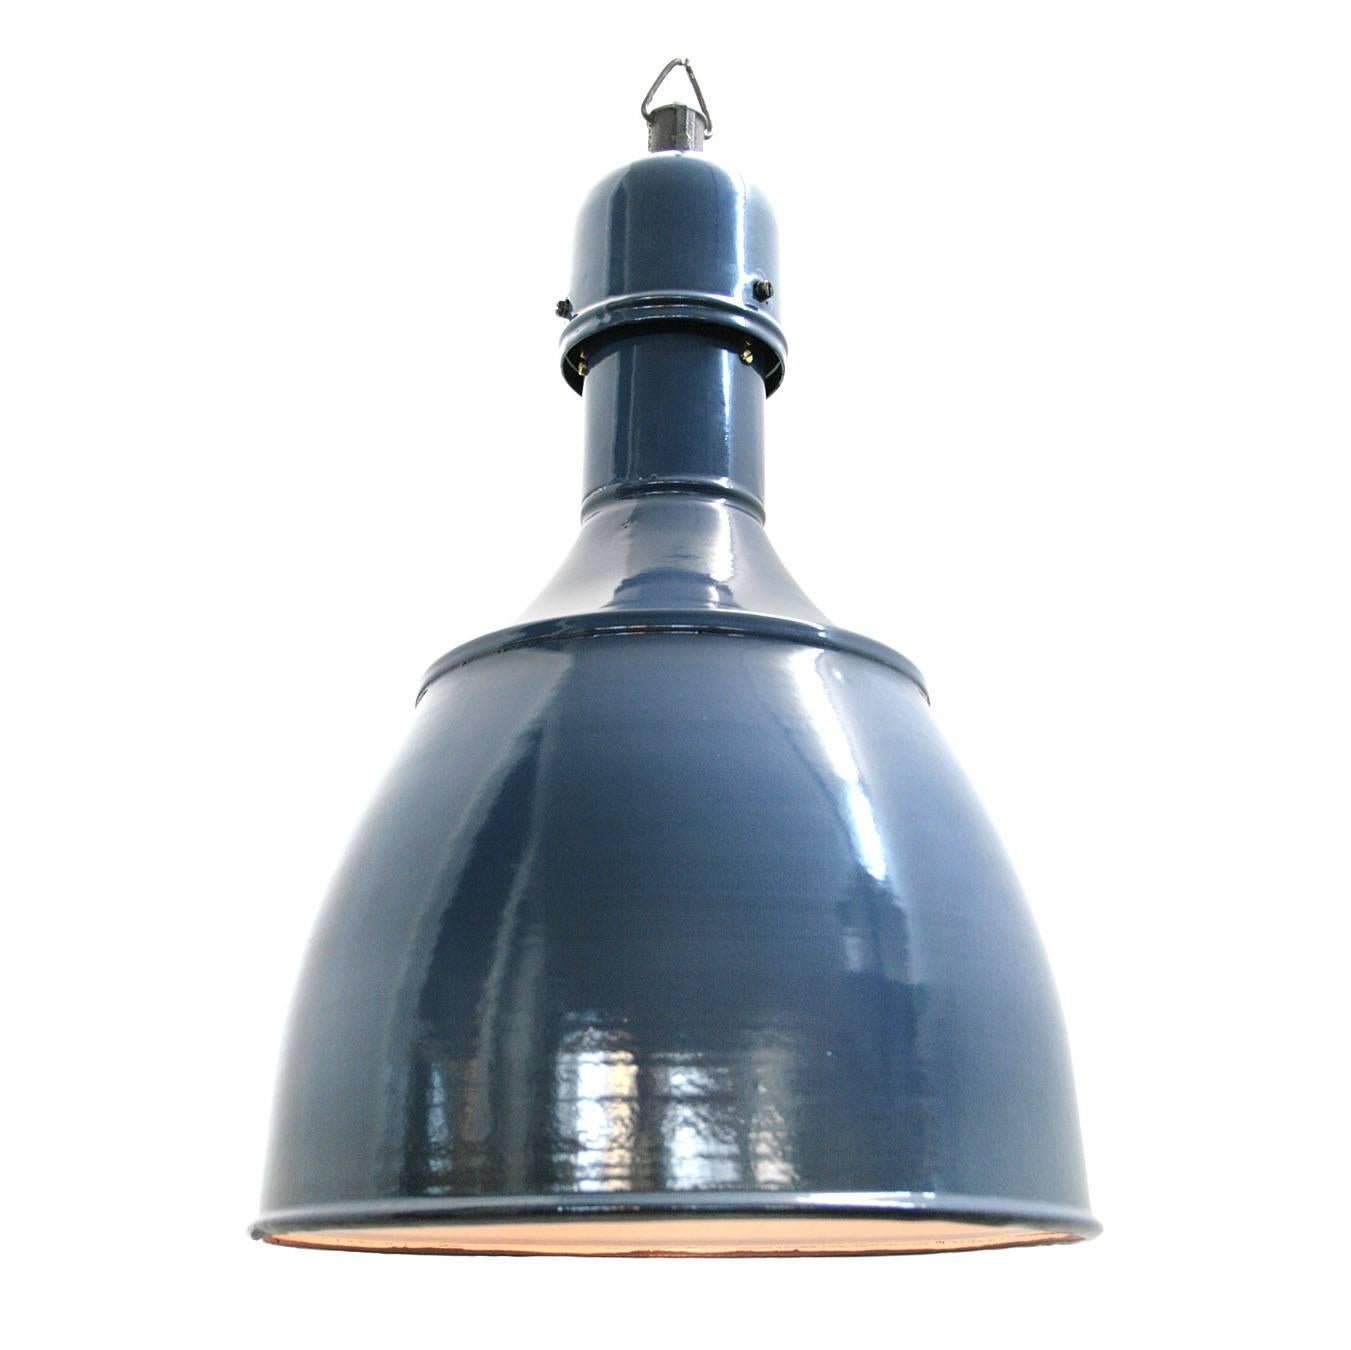 European Industrial Classic. Rare model. Used in warehouses and factories in east Europe. New Old Stock. 

Weight 2.3 kg or 5.1 lb.

Priced per individual item. All lamps have been made suitable by international standards for incandescent light